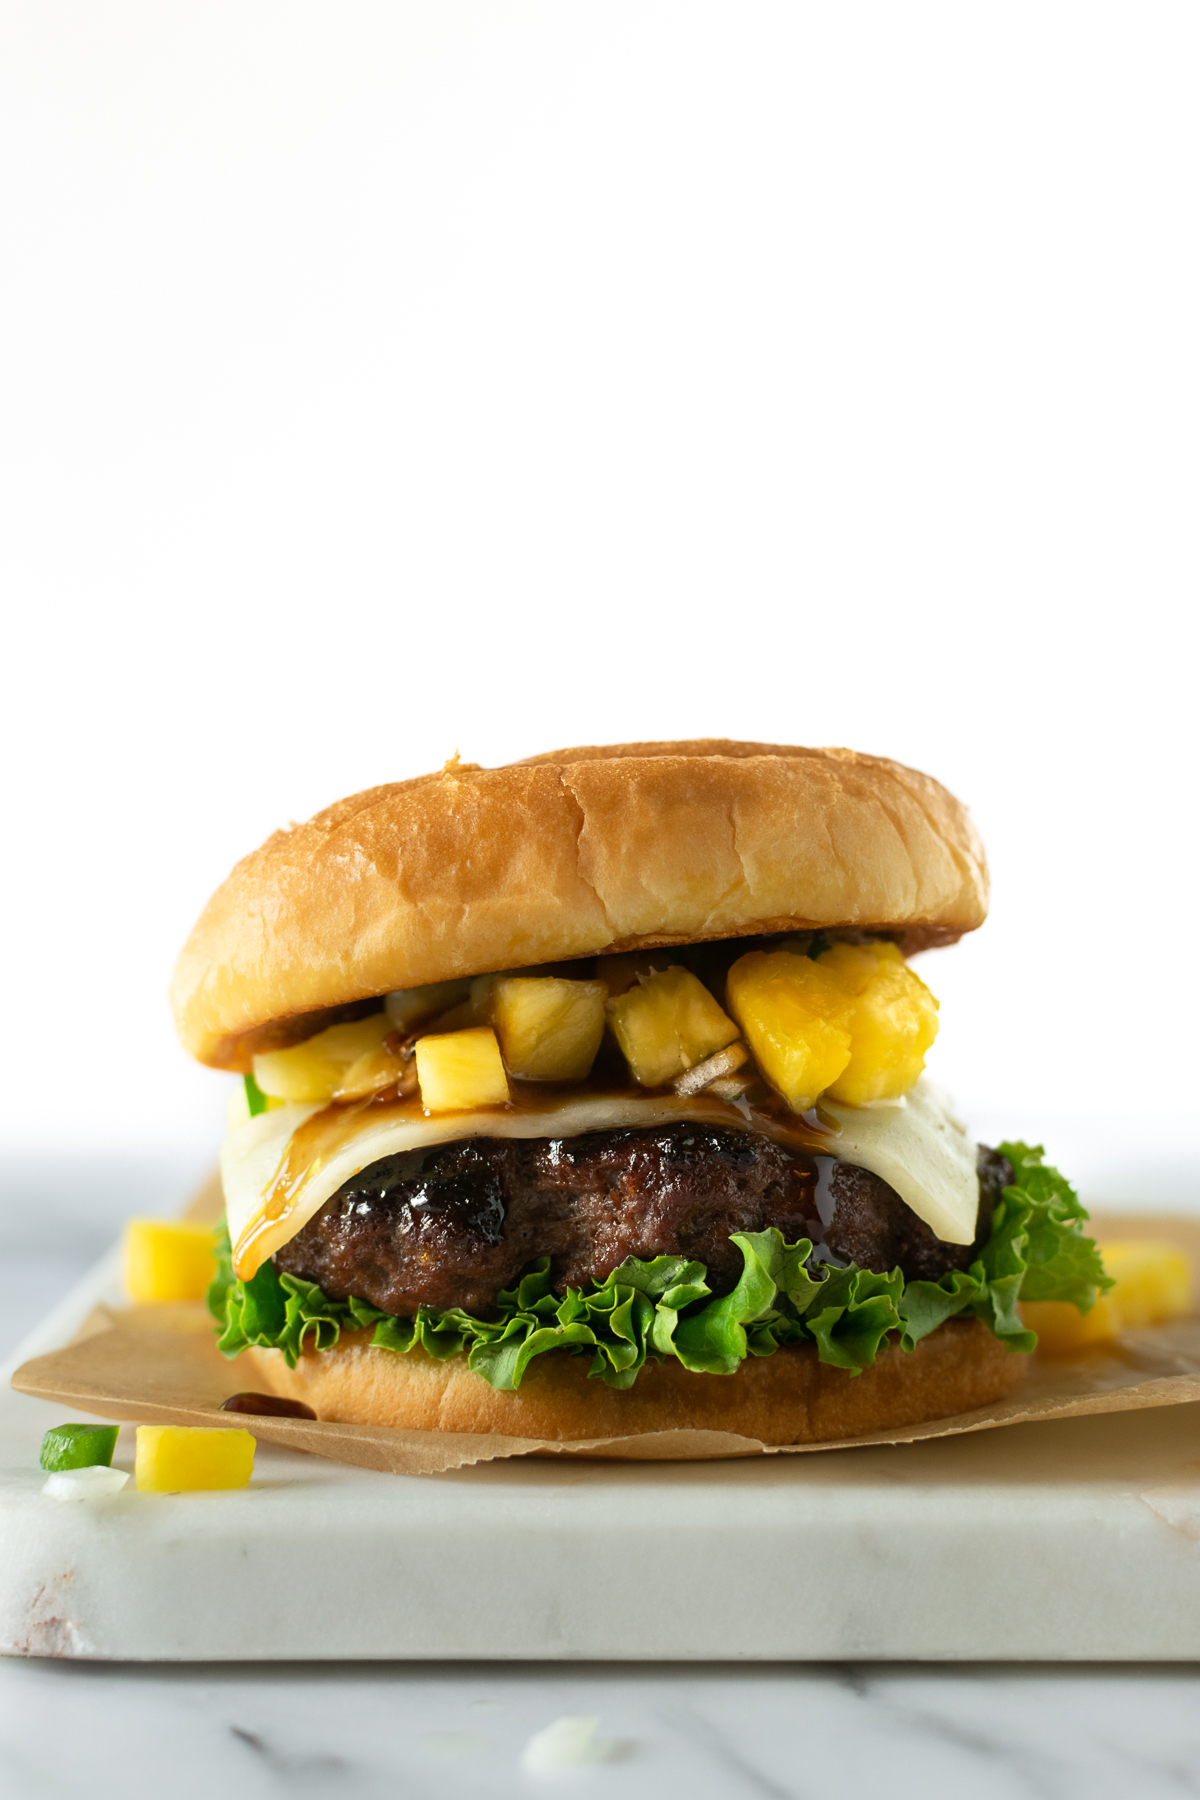 teriyaki burgers with melted cheese, lettuce, and pineapple salsa.